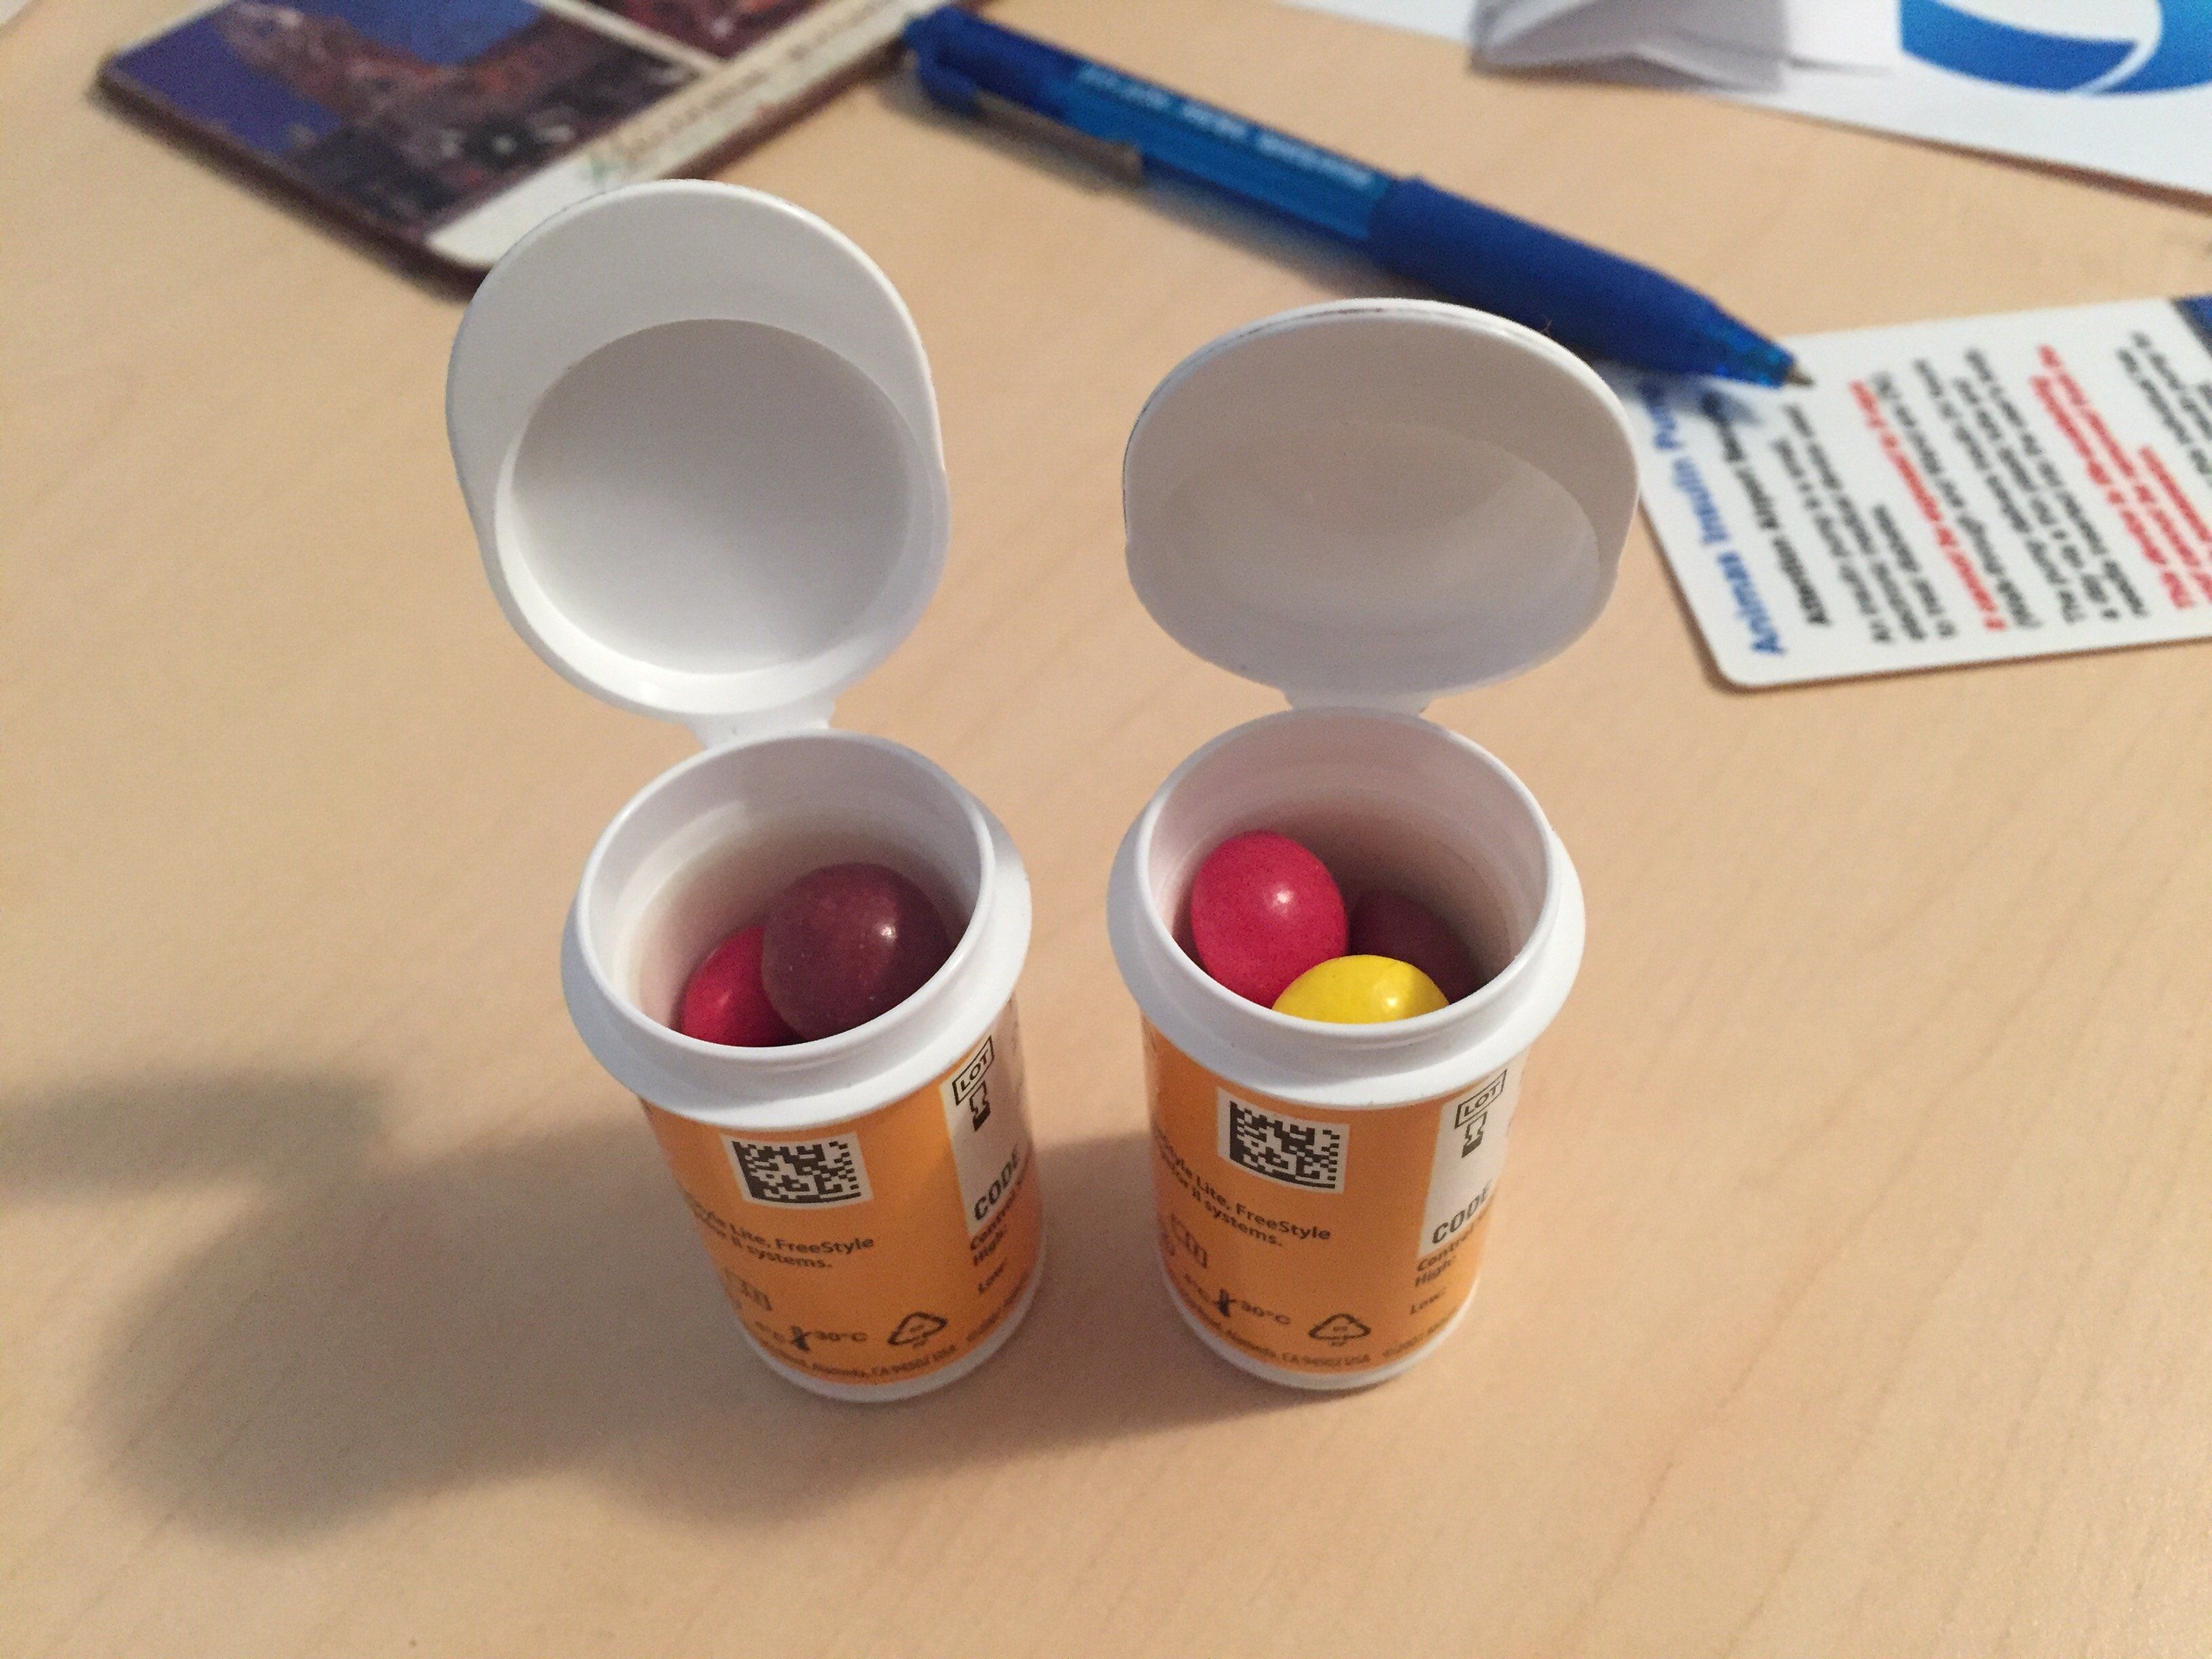 Coma reccomend Diabetes fund drive using empty test strip containers